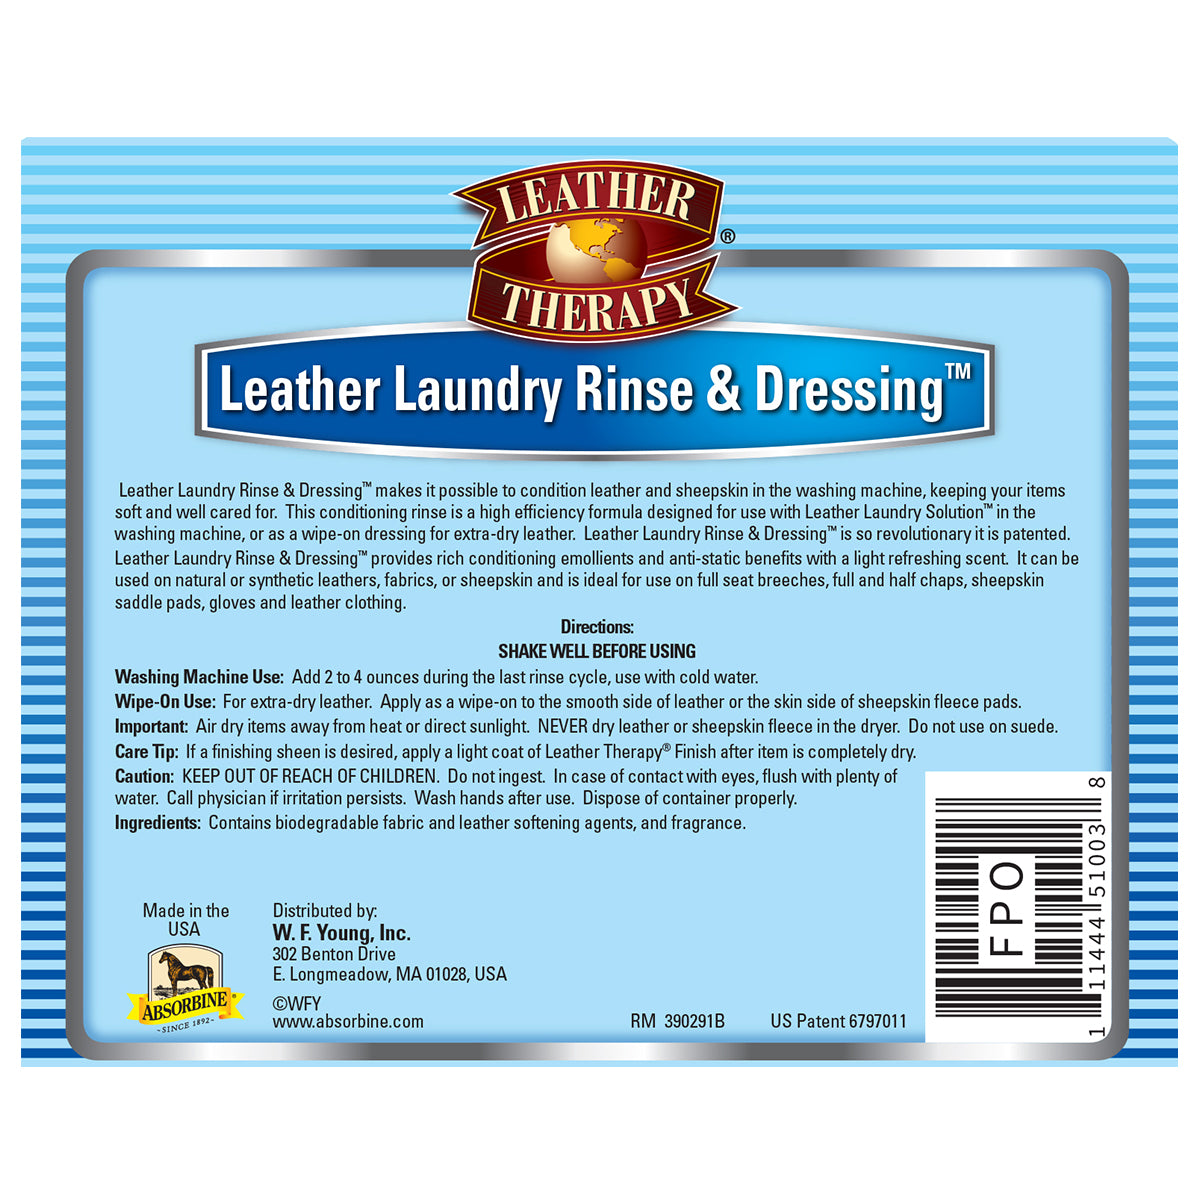 Leather Therapy brand Leather Laundry Rinse & Dressing back label.